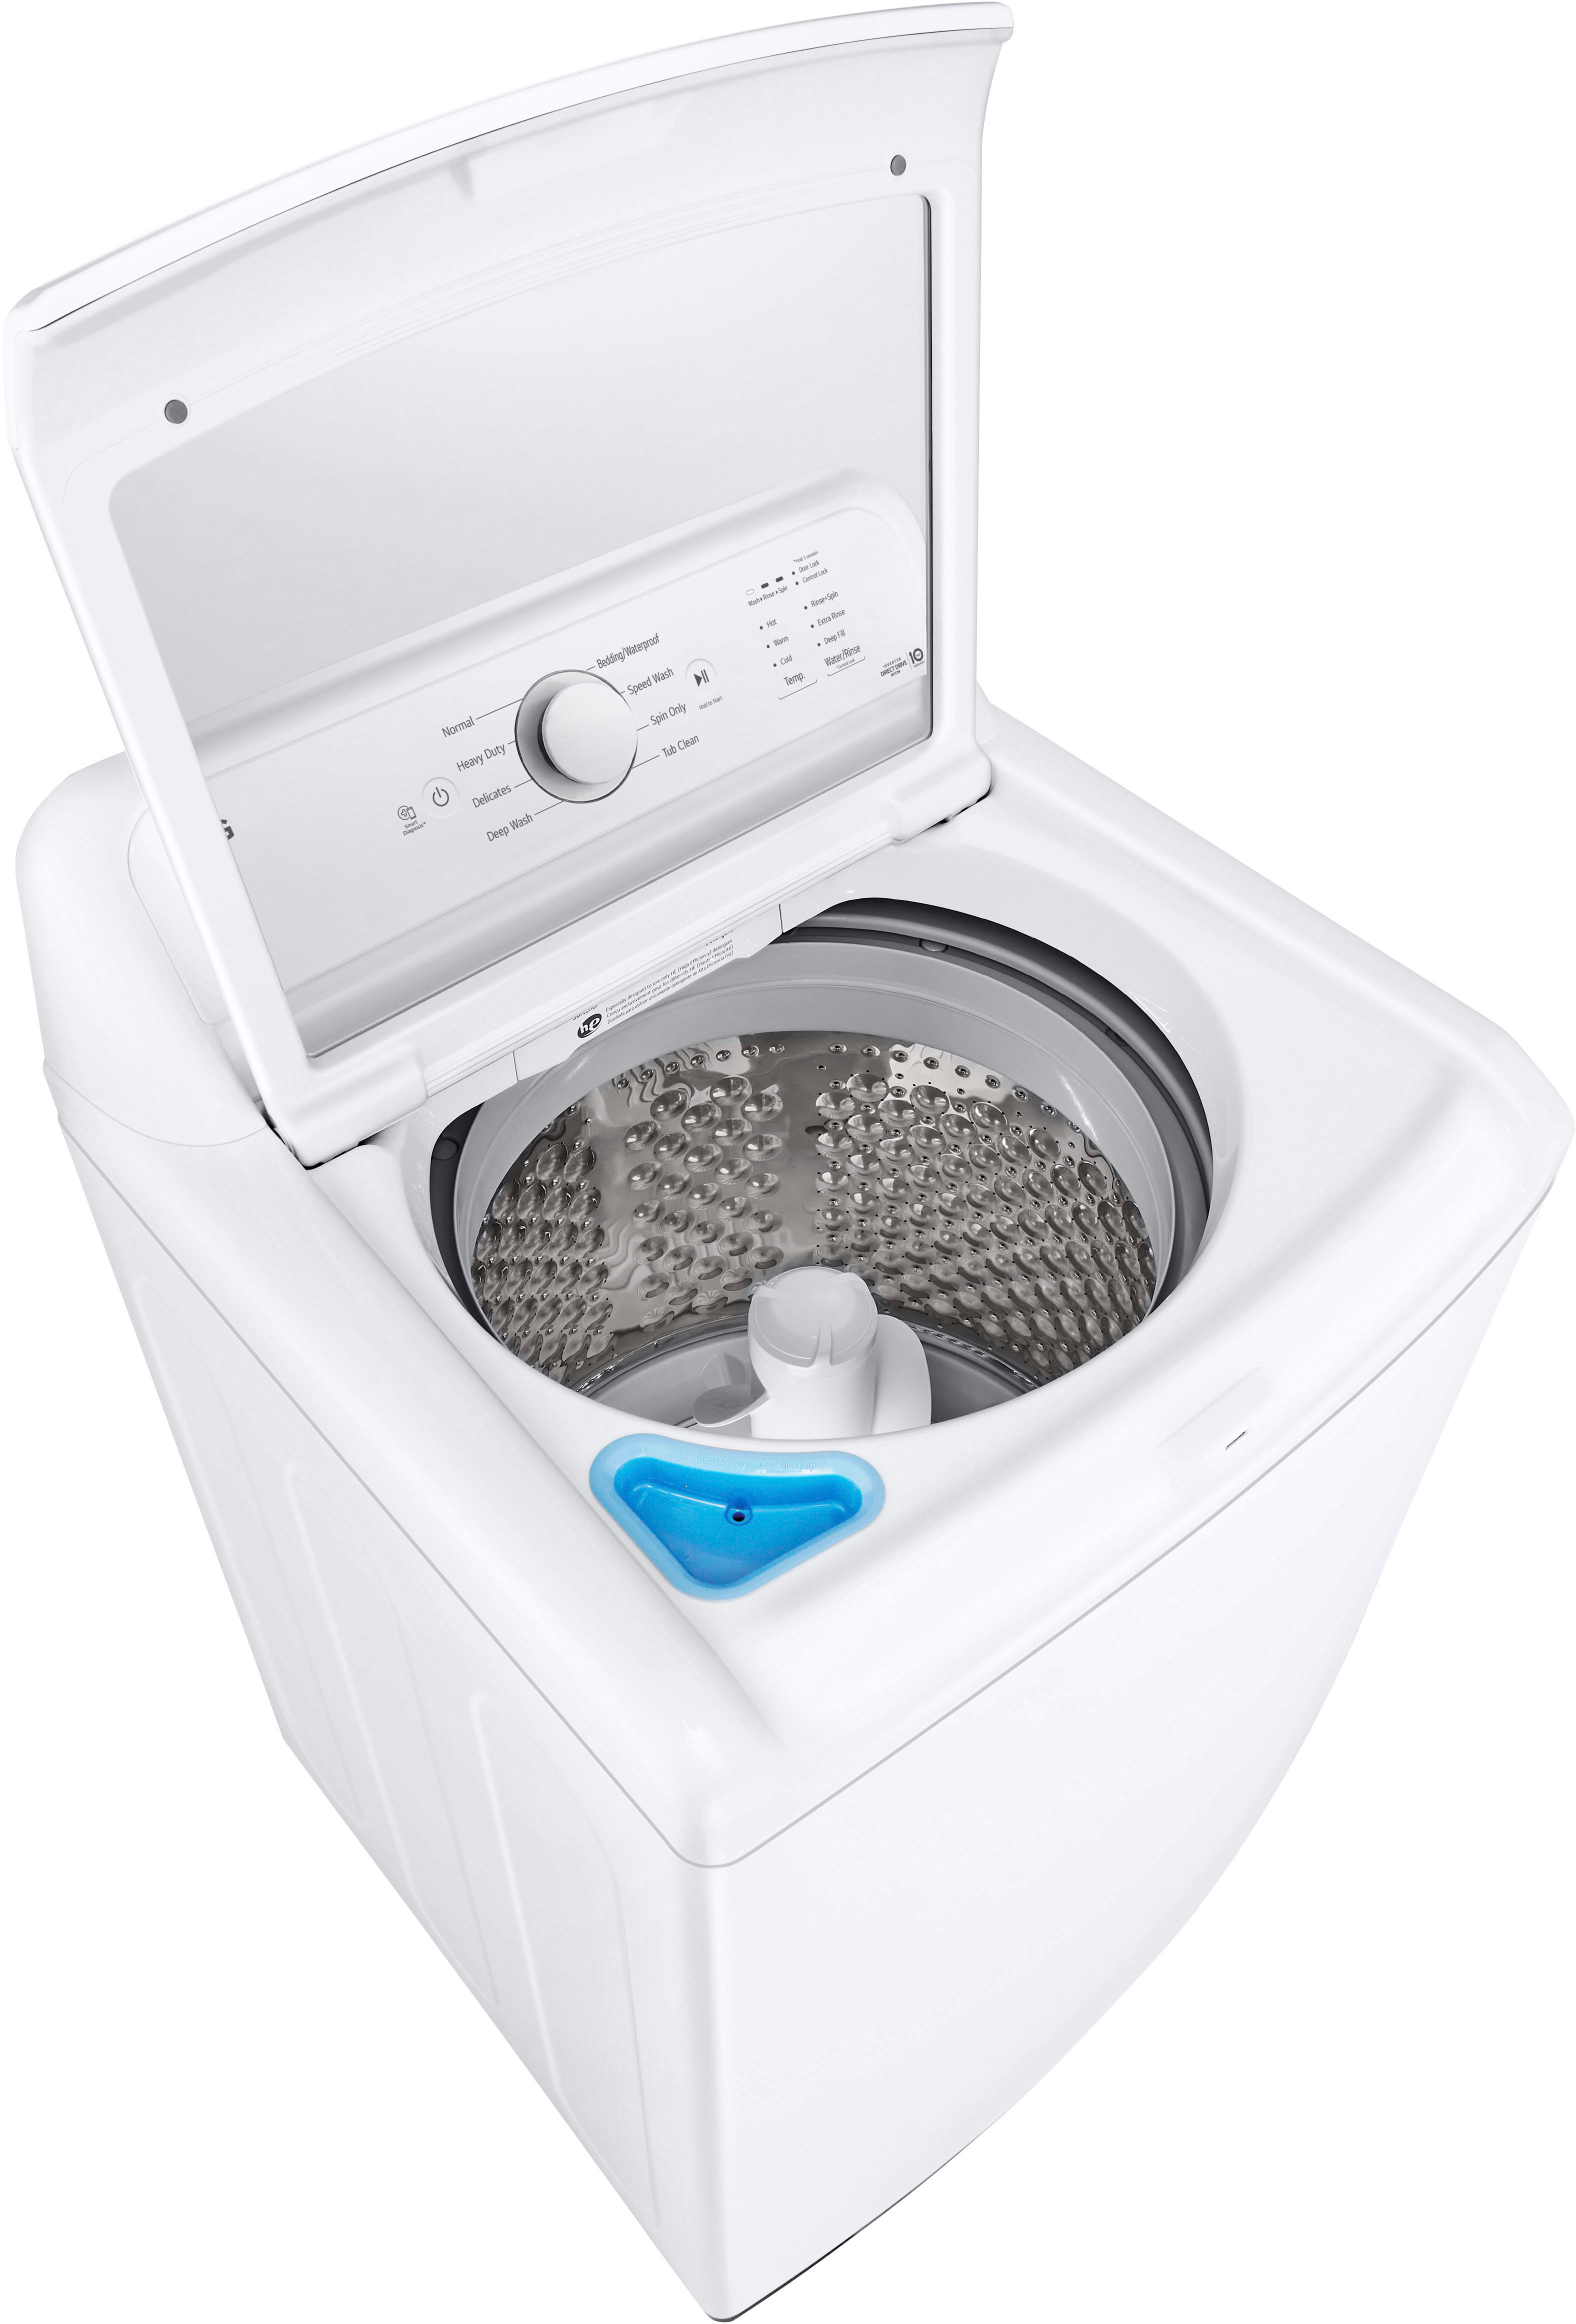 Best - Lid Glass White Washer WT6105CW 4.1 Top Cu. SlamProof LG Ft. Buy Load with